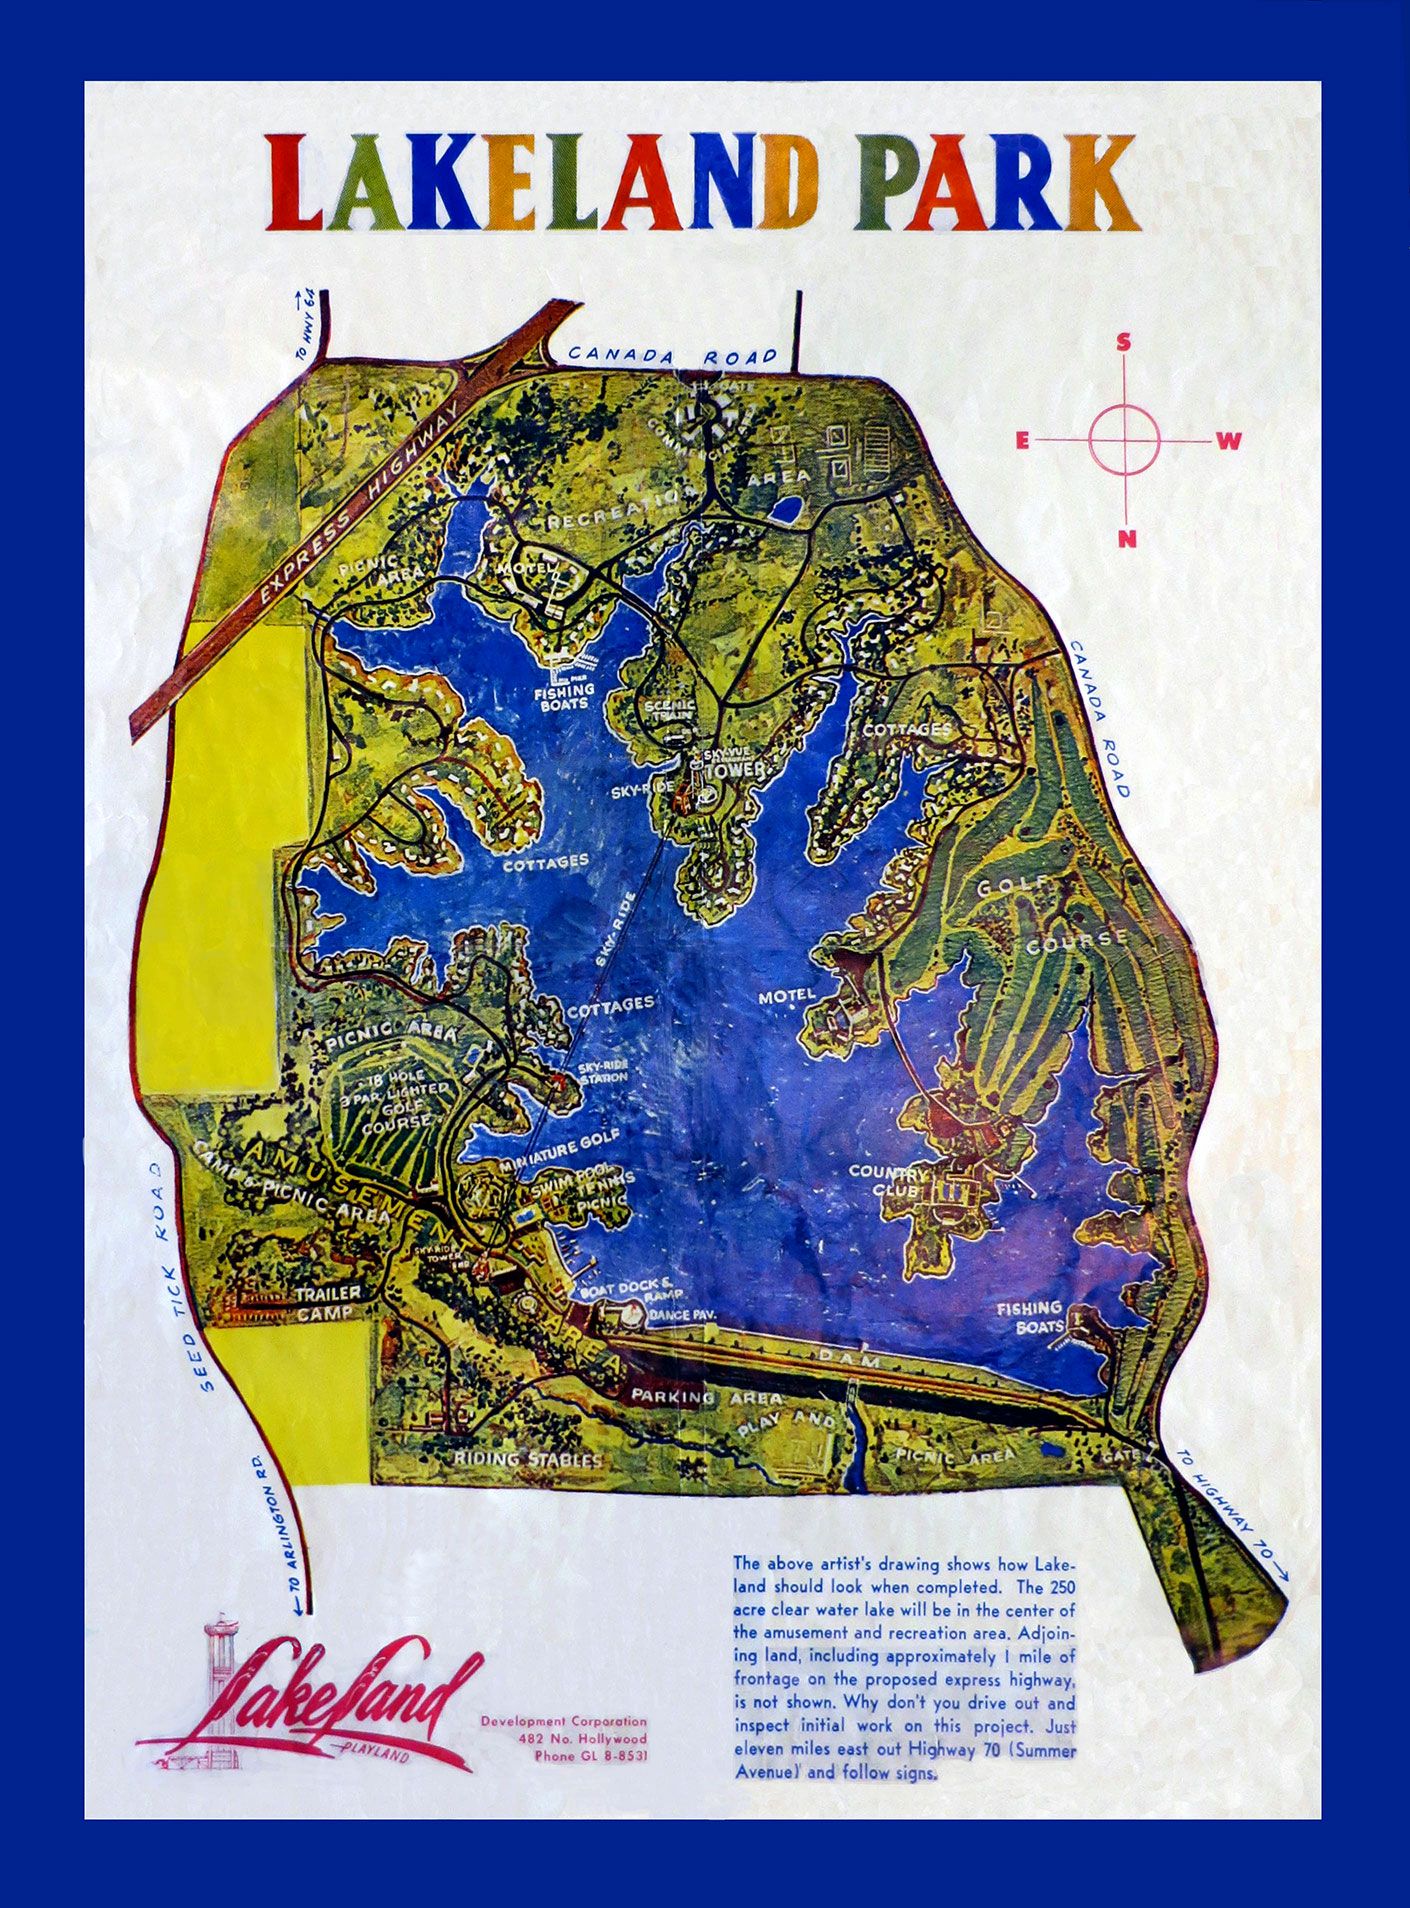 A promotional poster showing the plans for Lakeland Lake and Amusement Park